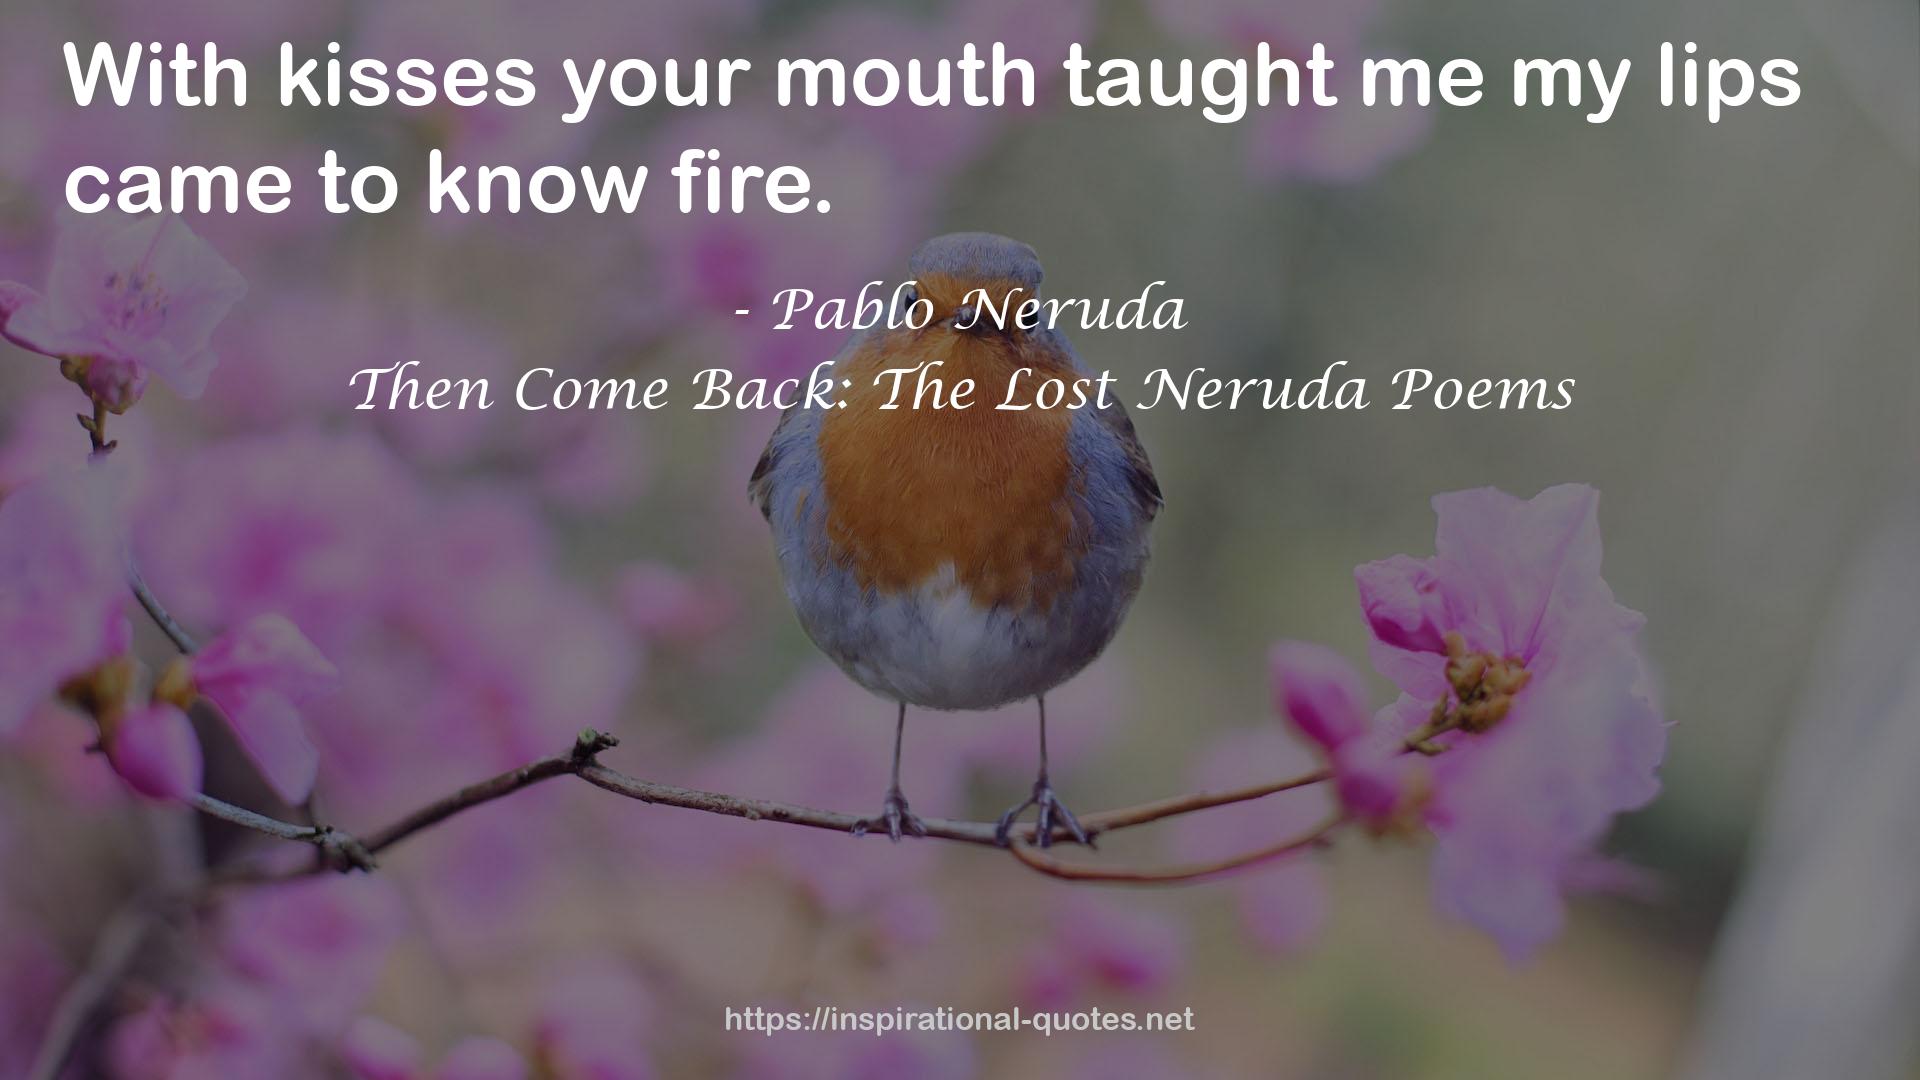 Then Come Back: The Lost Neruda Poems QUOTES